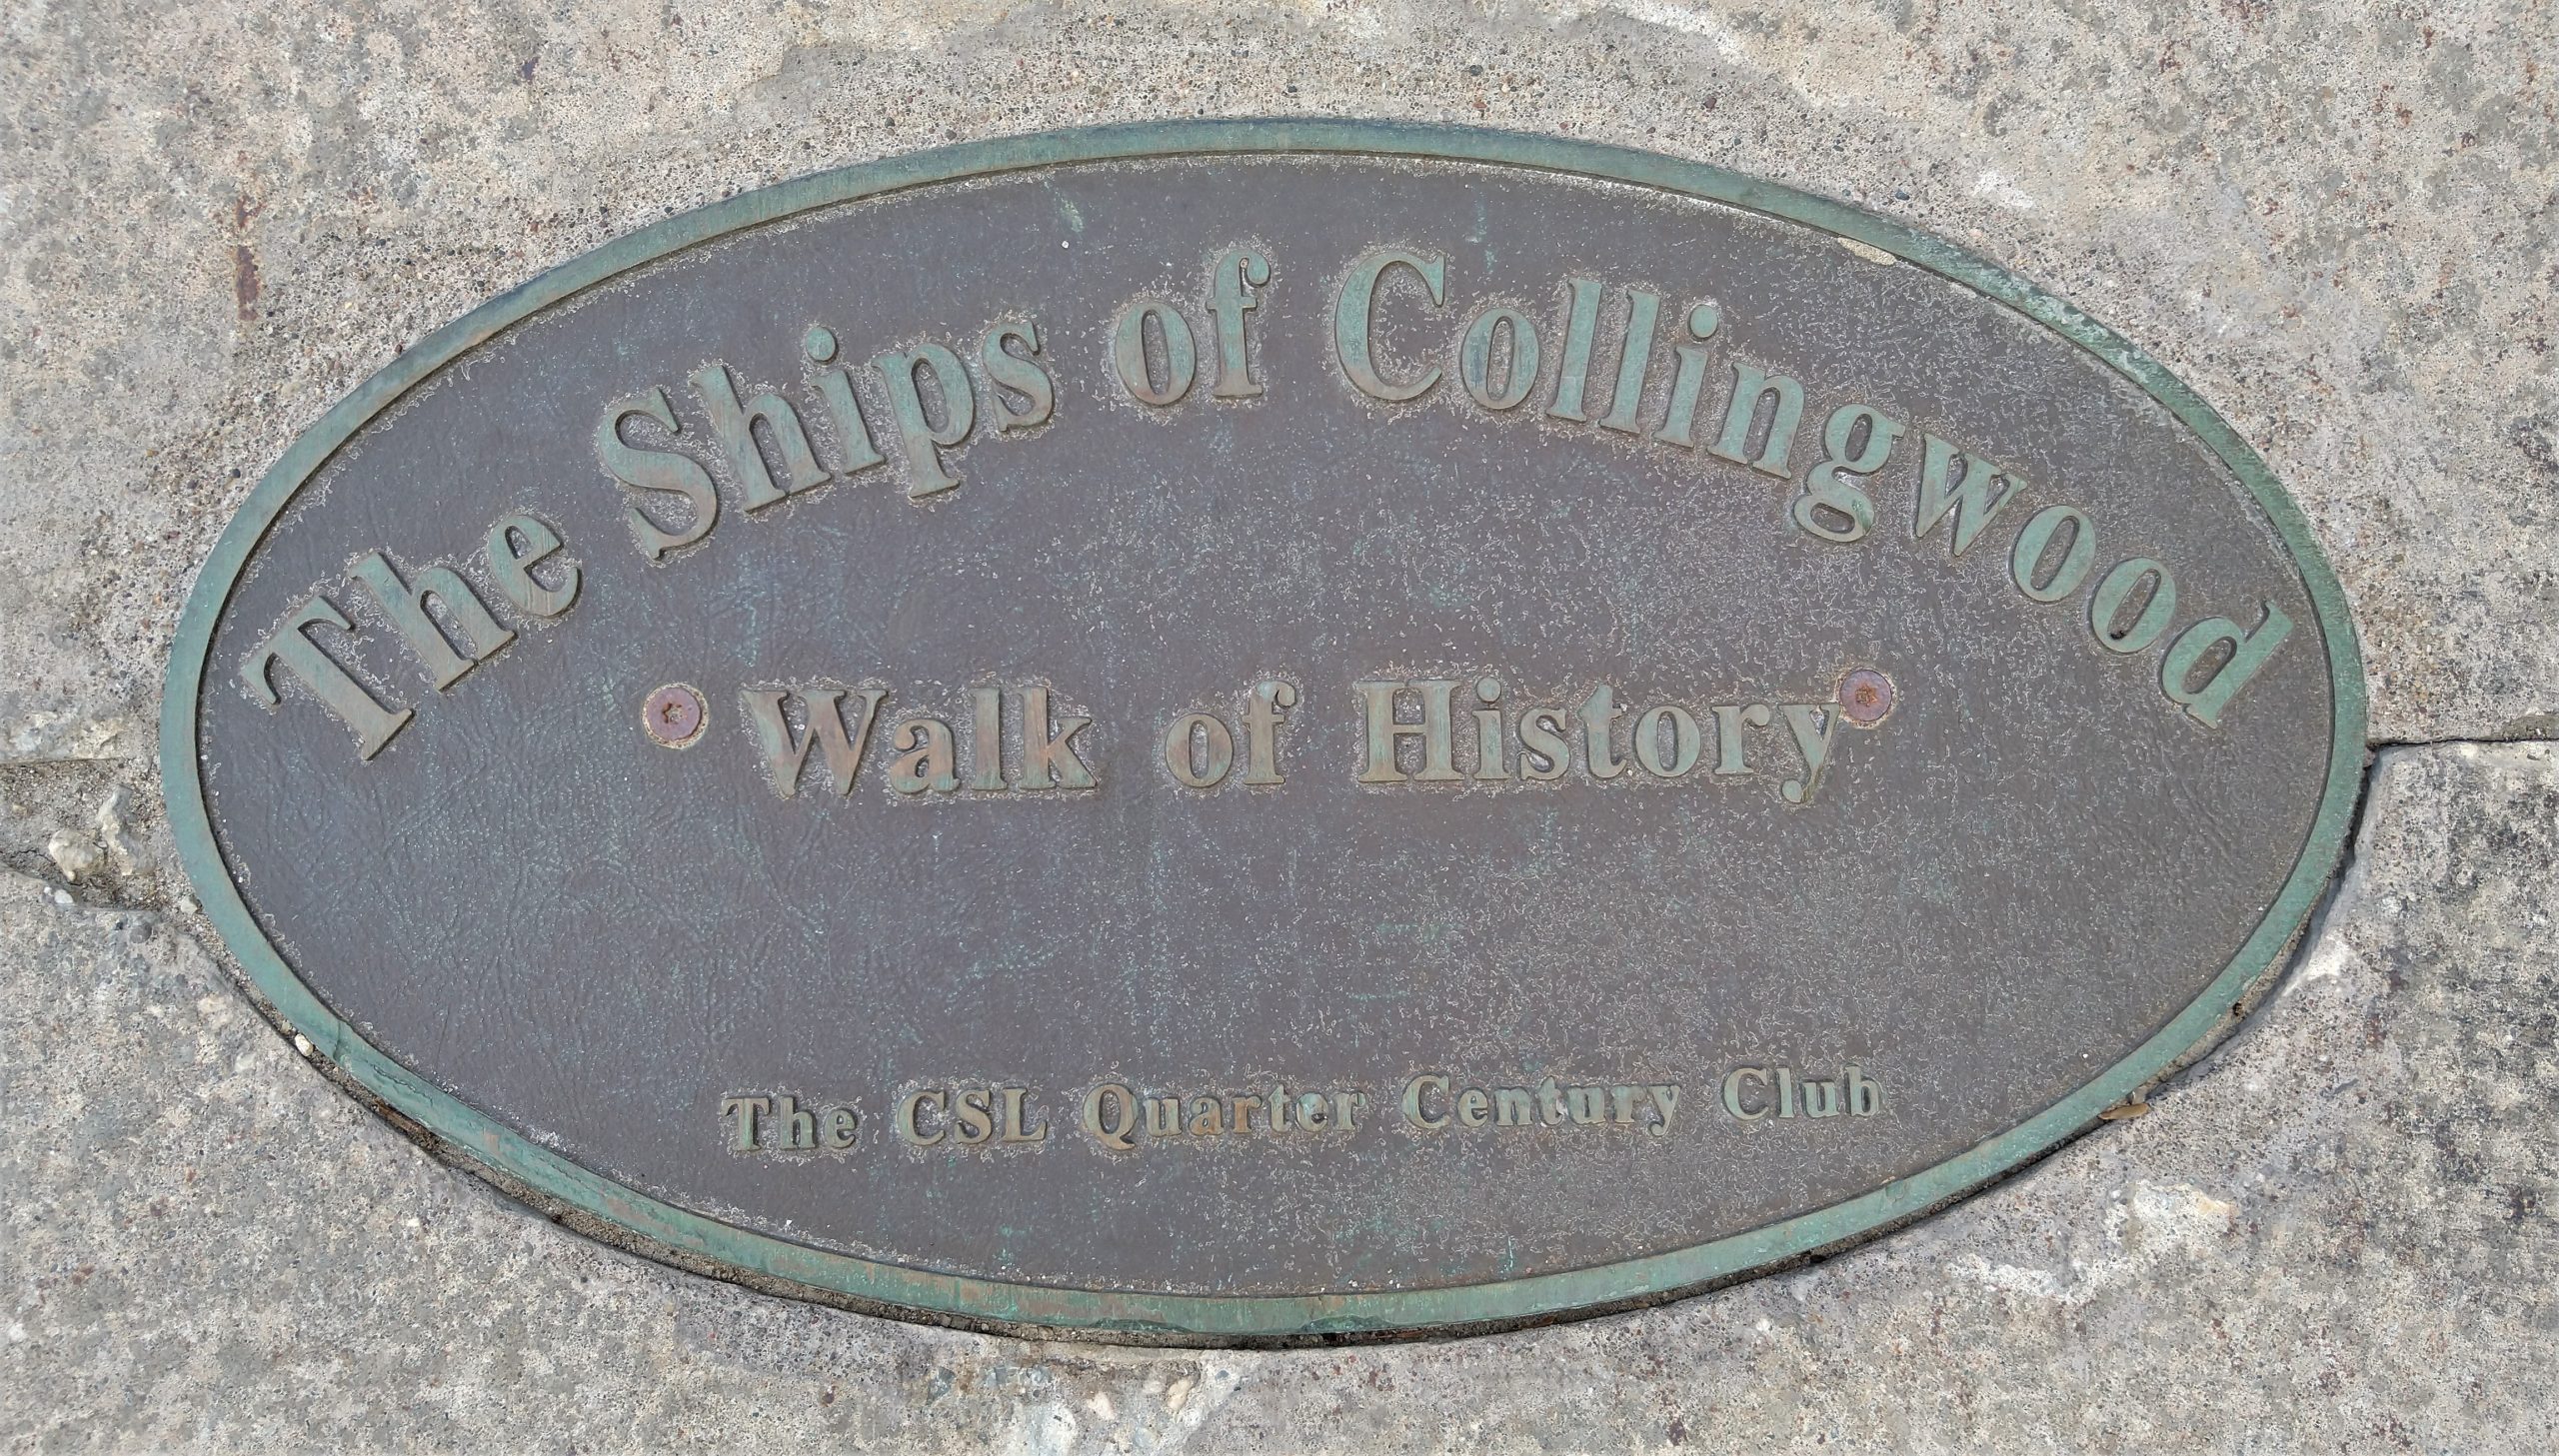 Our neglected heritage walk: first plaque